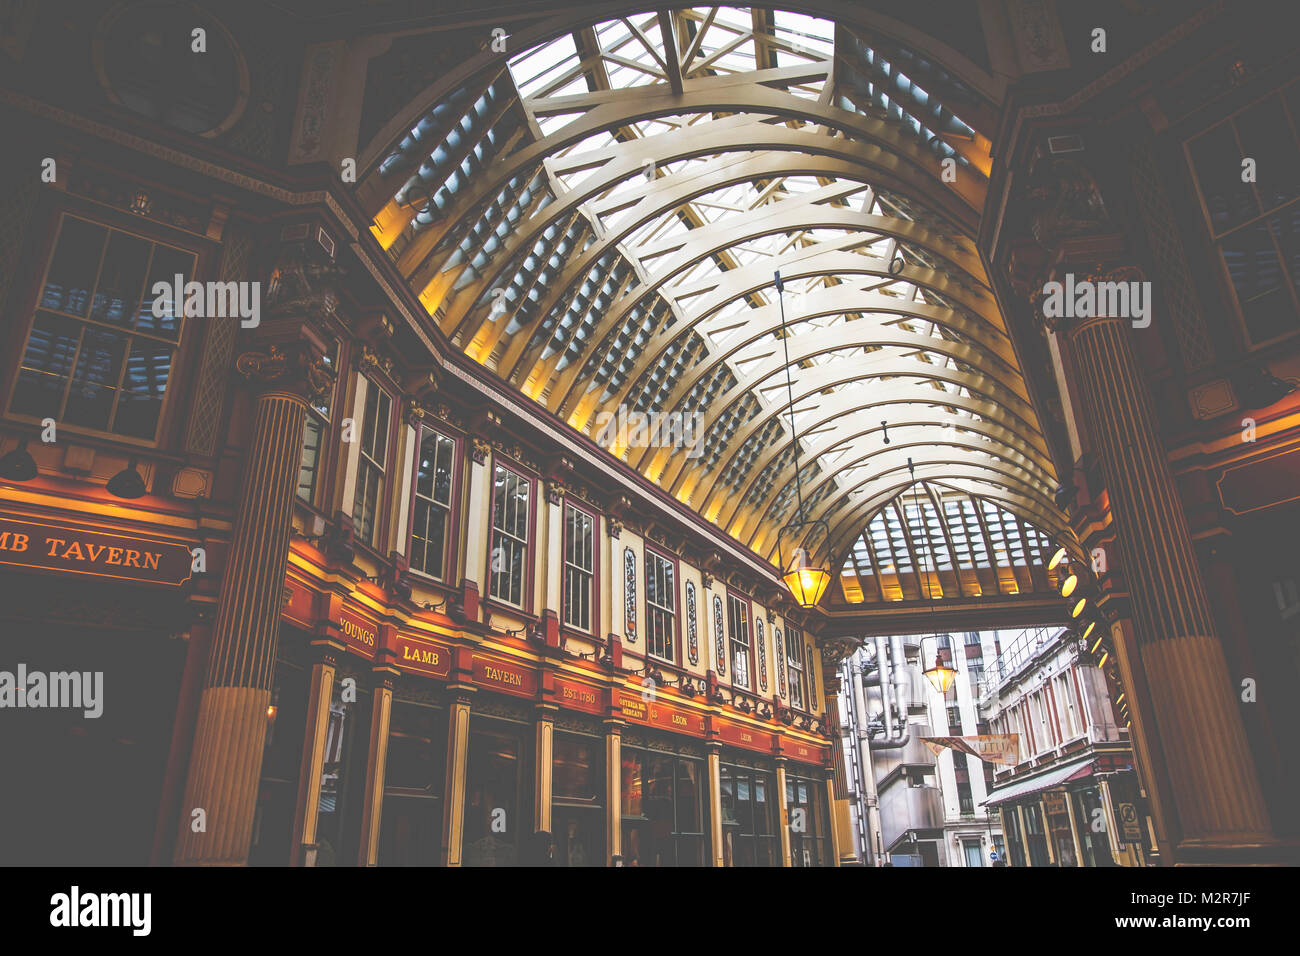 The Leadenhall Market - a passage in the heart of London, city of London, England, Great Britain, Stock Photo